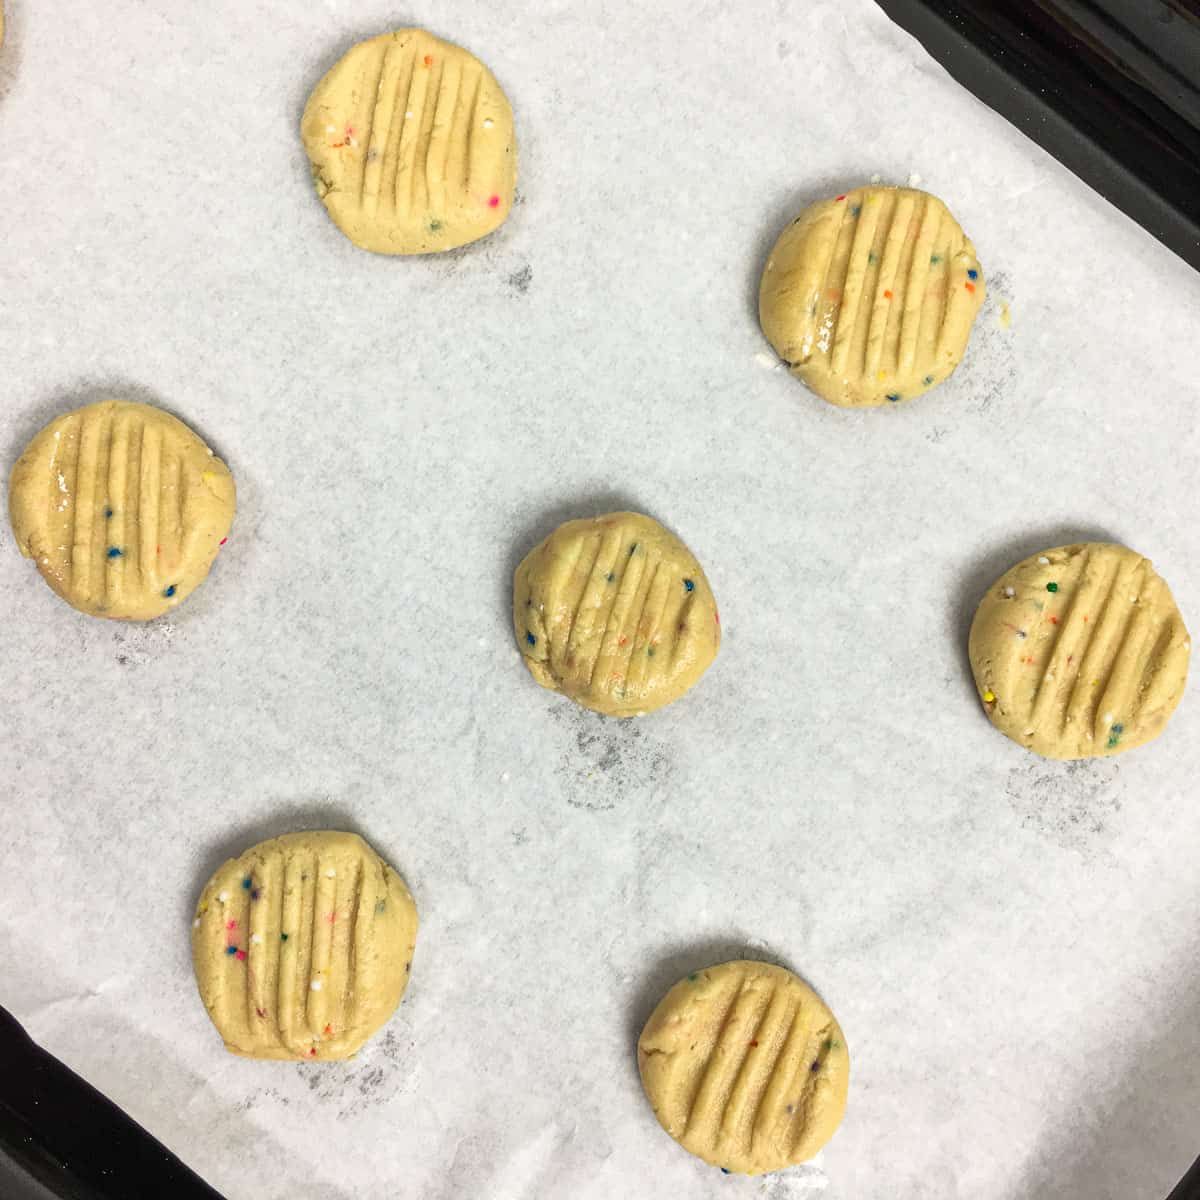 Round unbaked cookies on a paper